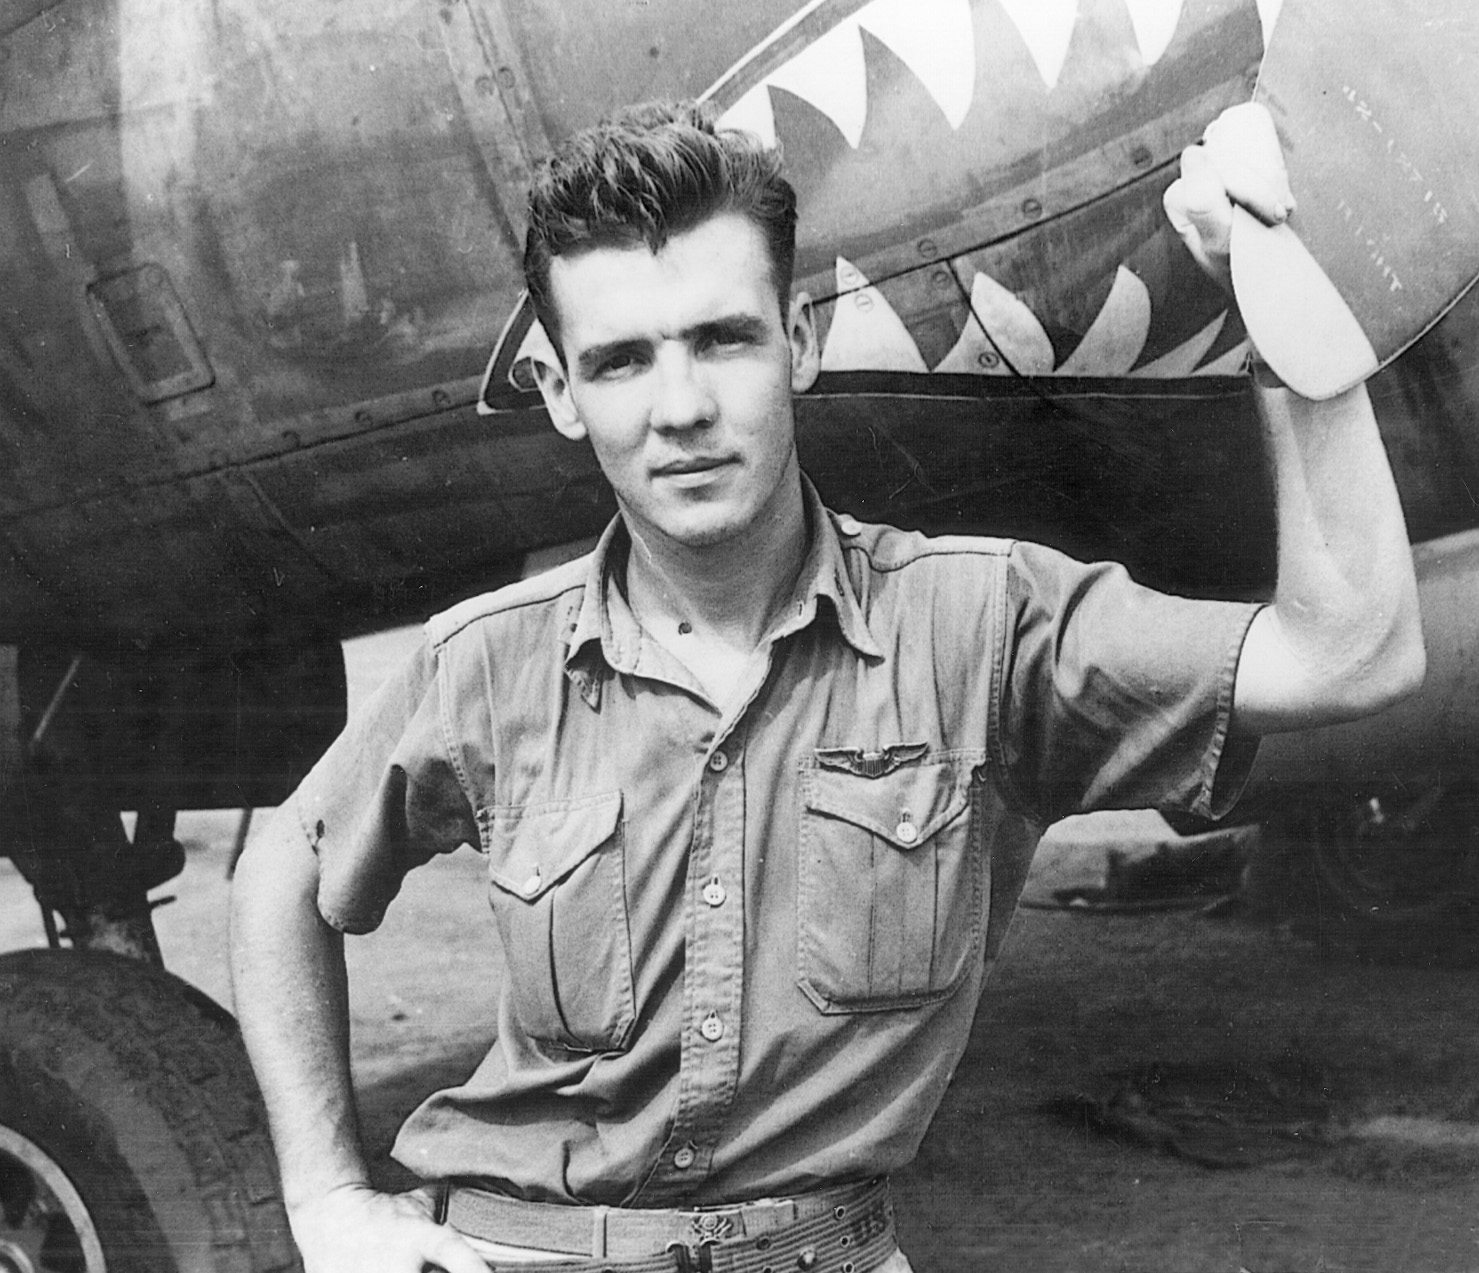 Captain Thomas C. Lynch was one of the top American fighter aces in the Pacific.